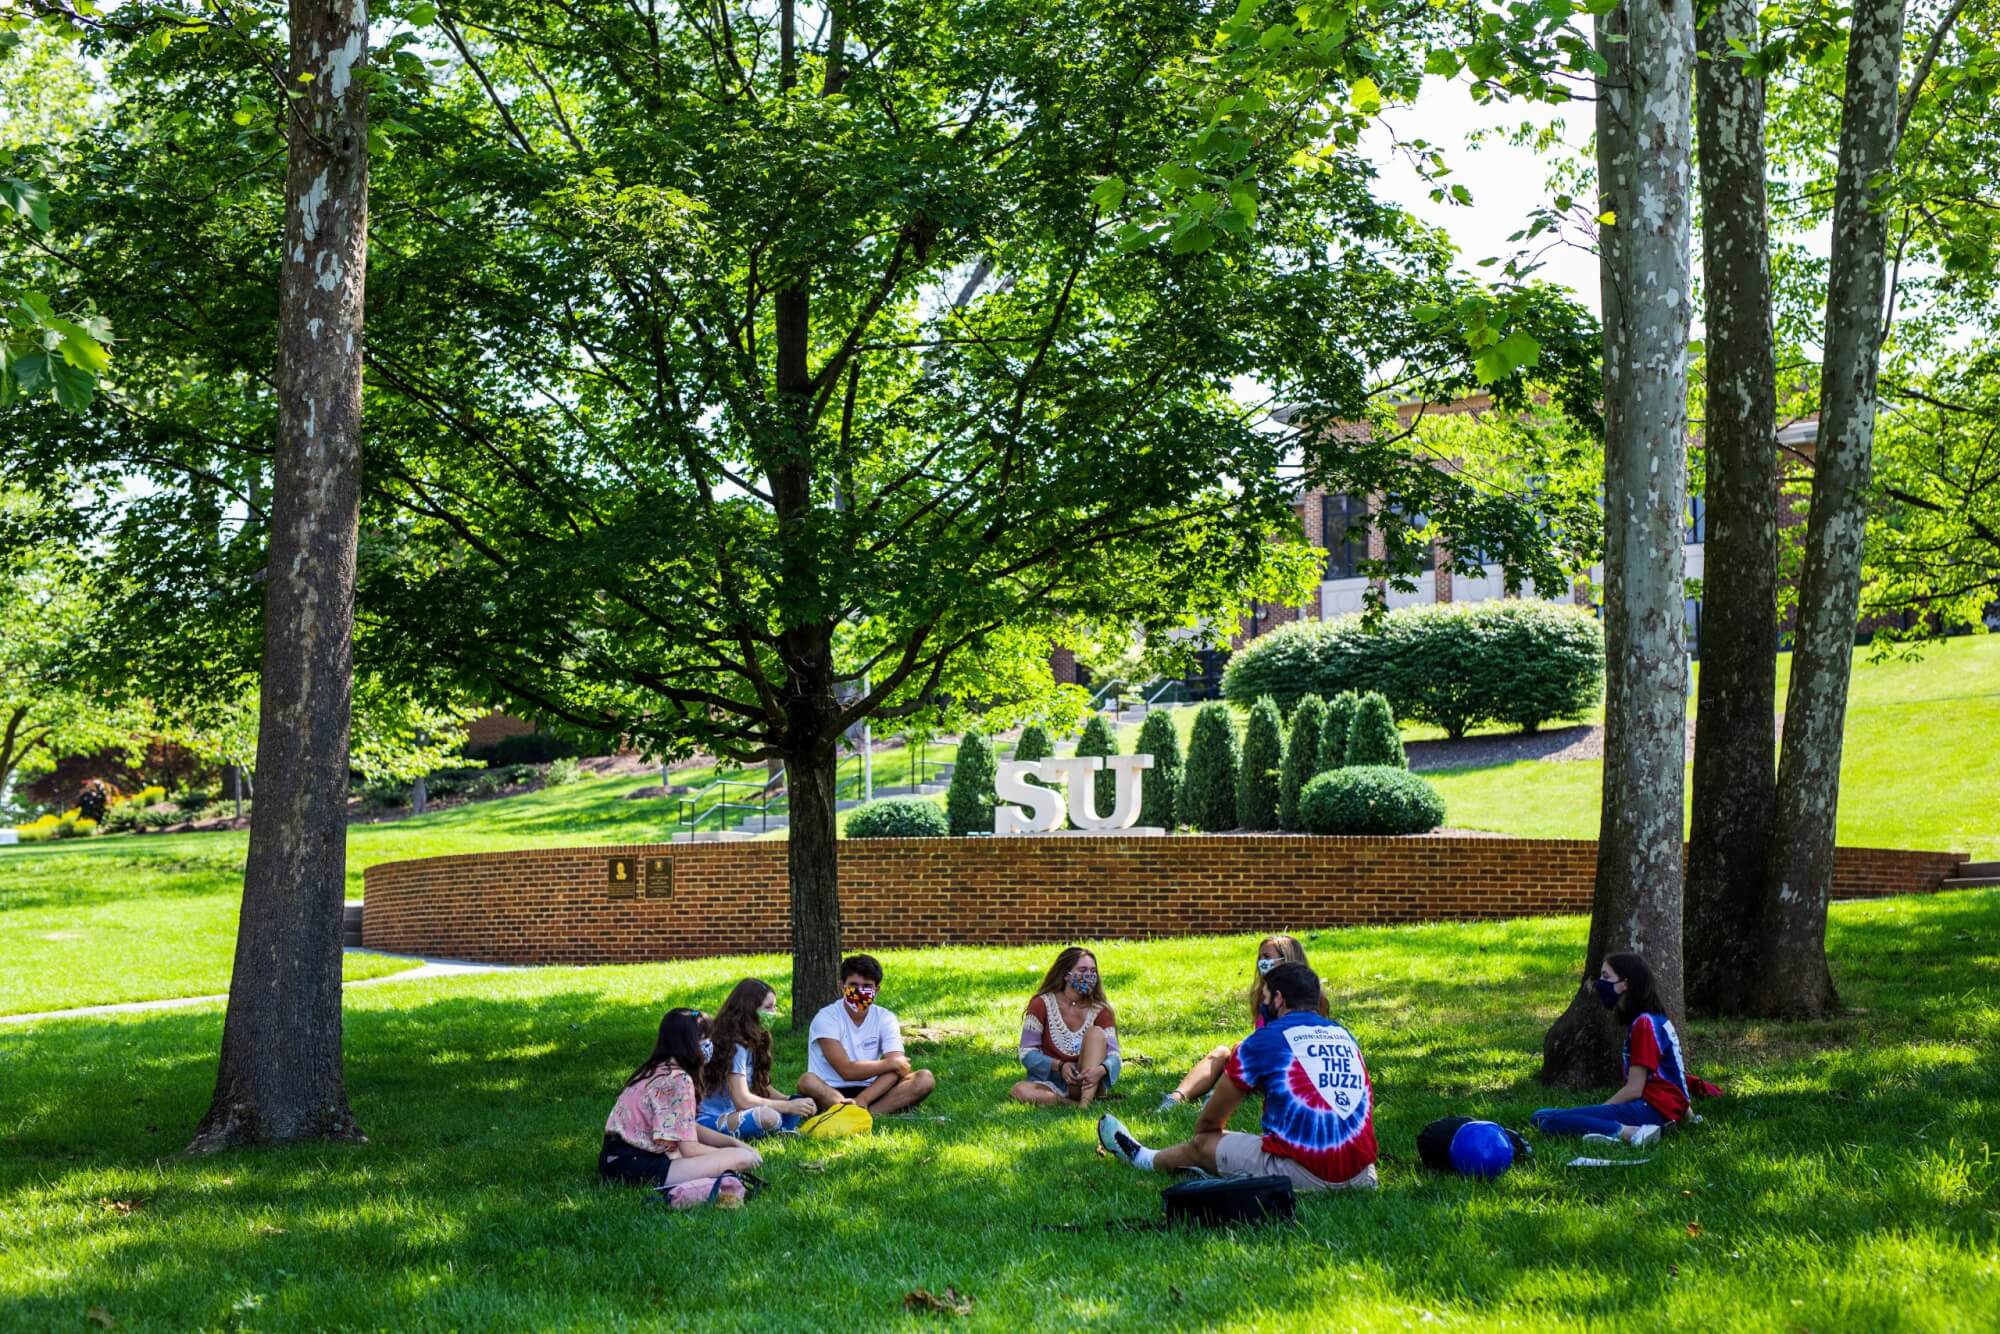 Shenandoah Climbs in 2021 U.S. News & World Report Rankings University improves in several categories, including overall score